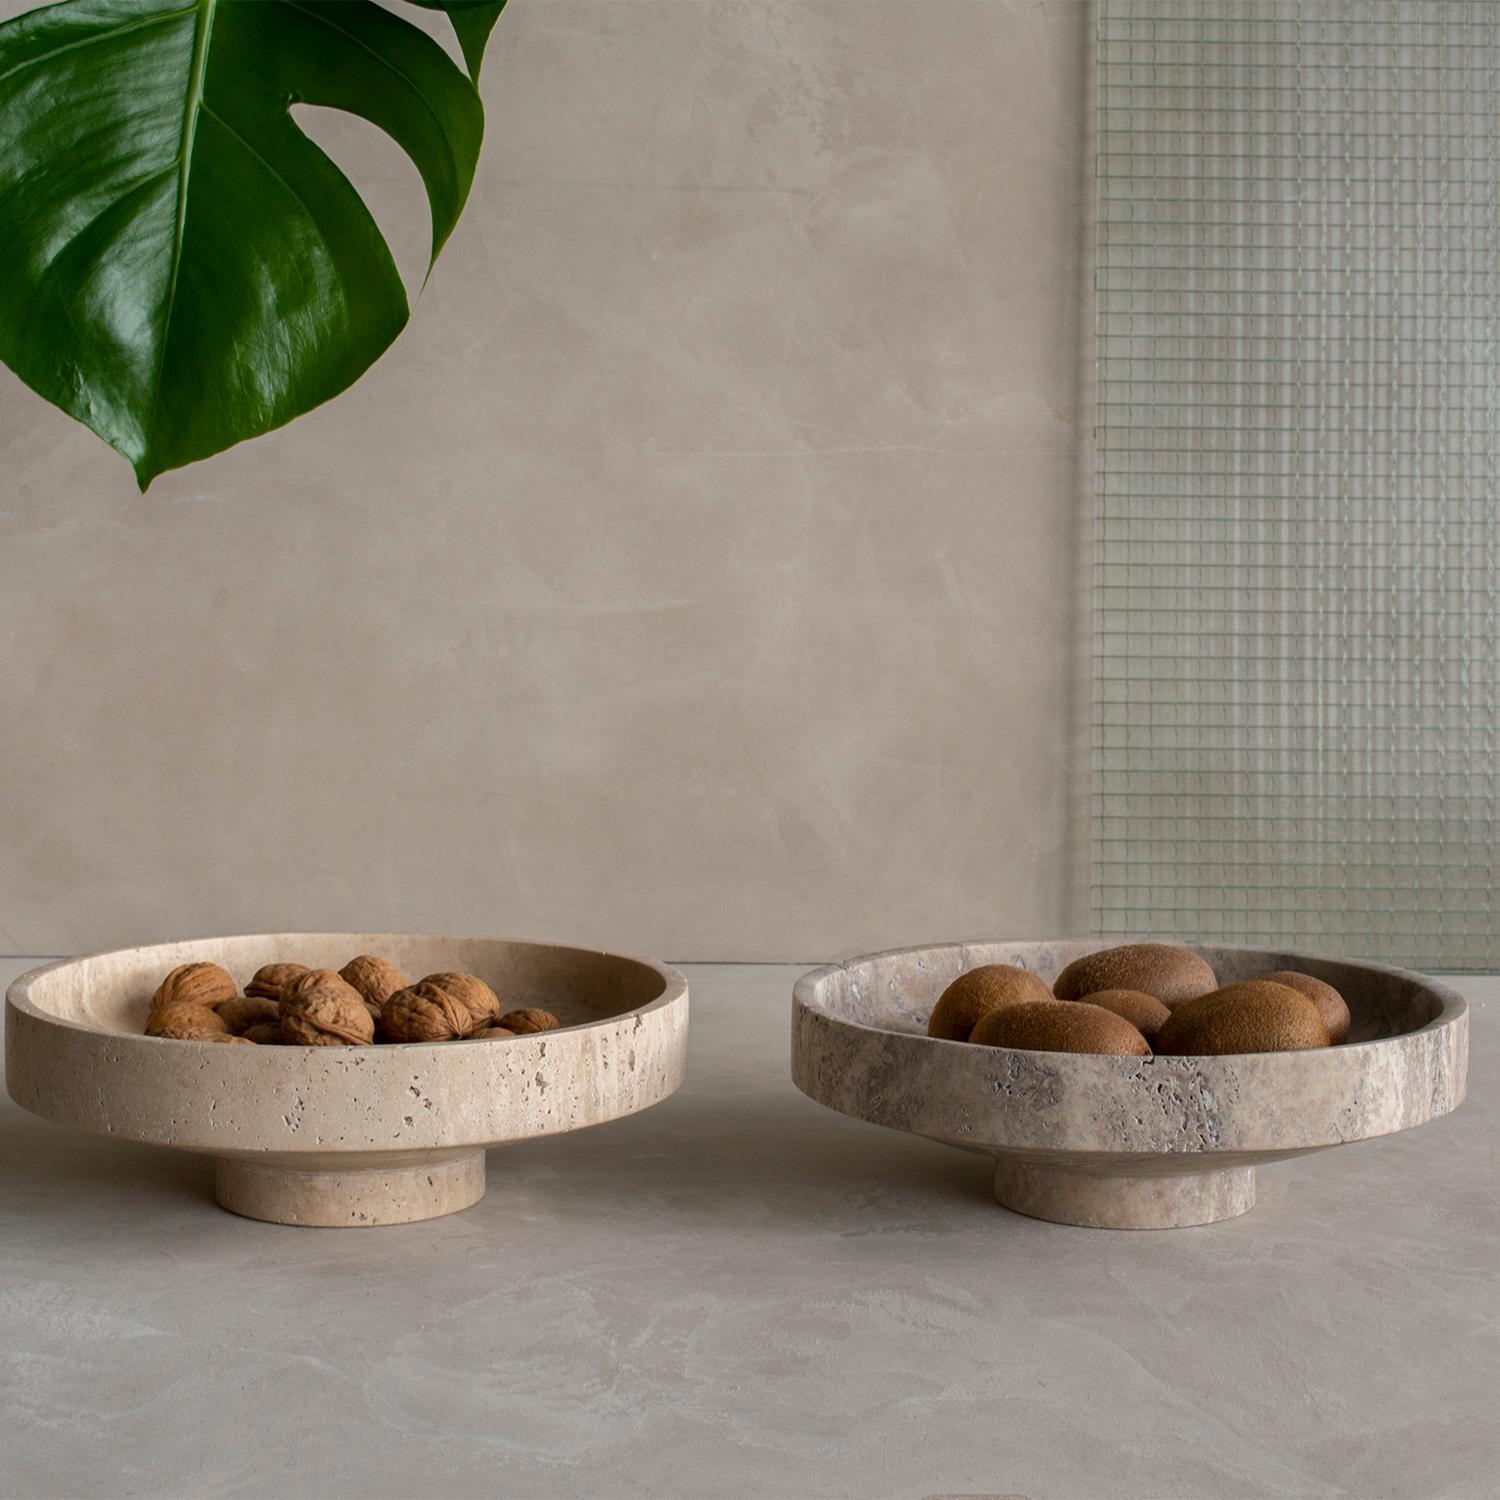 Stunning, aesthetic, timeless are words that can be used to describe this elegant and modern travertine bowl from Kiwano. Expertly crafted and finished by hand, our travertine bowls are a study in sculptural simplicity. Natural variations in the